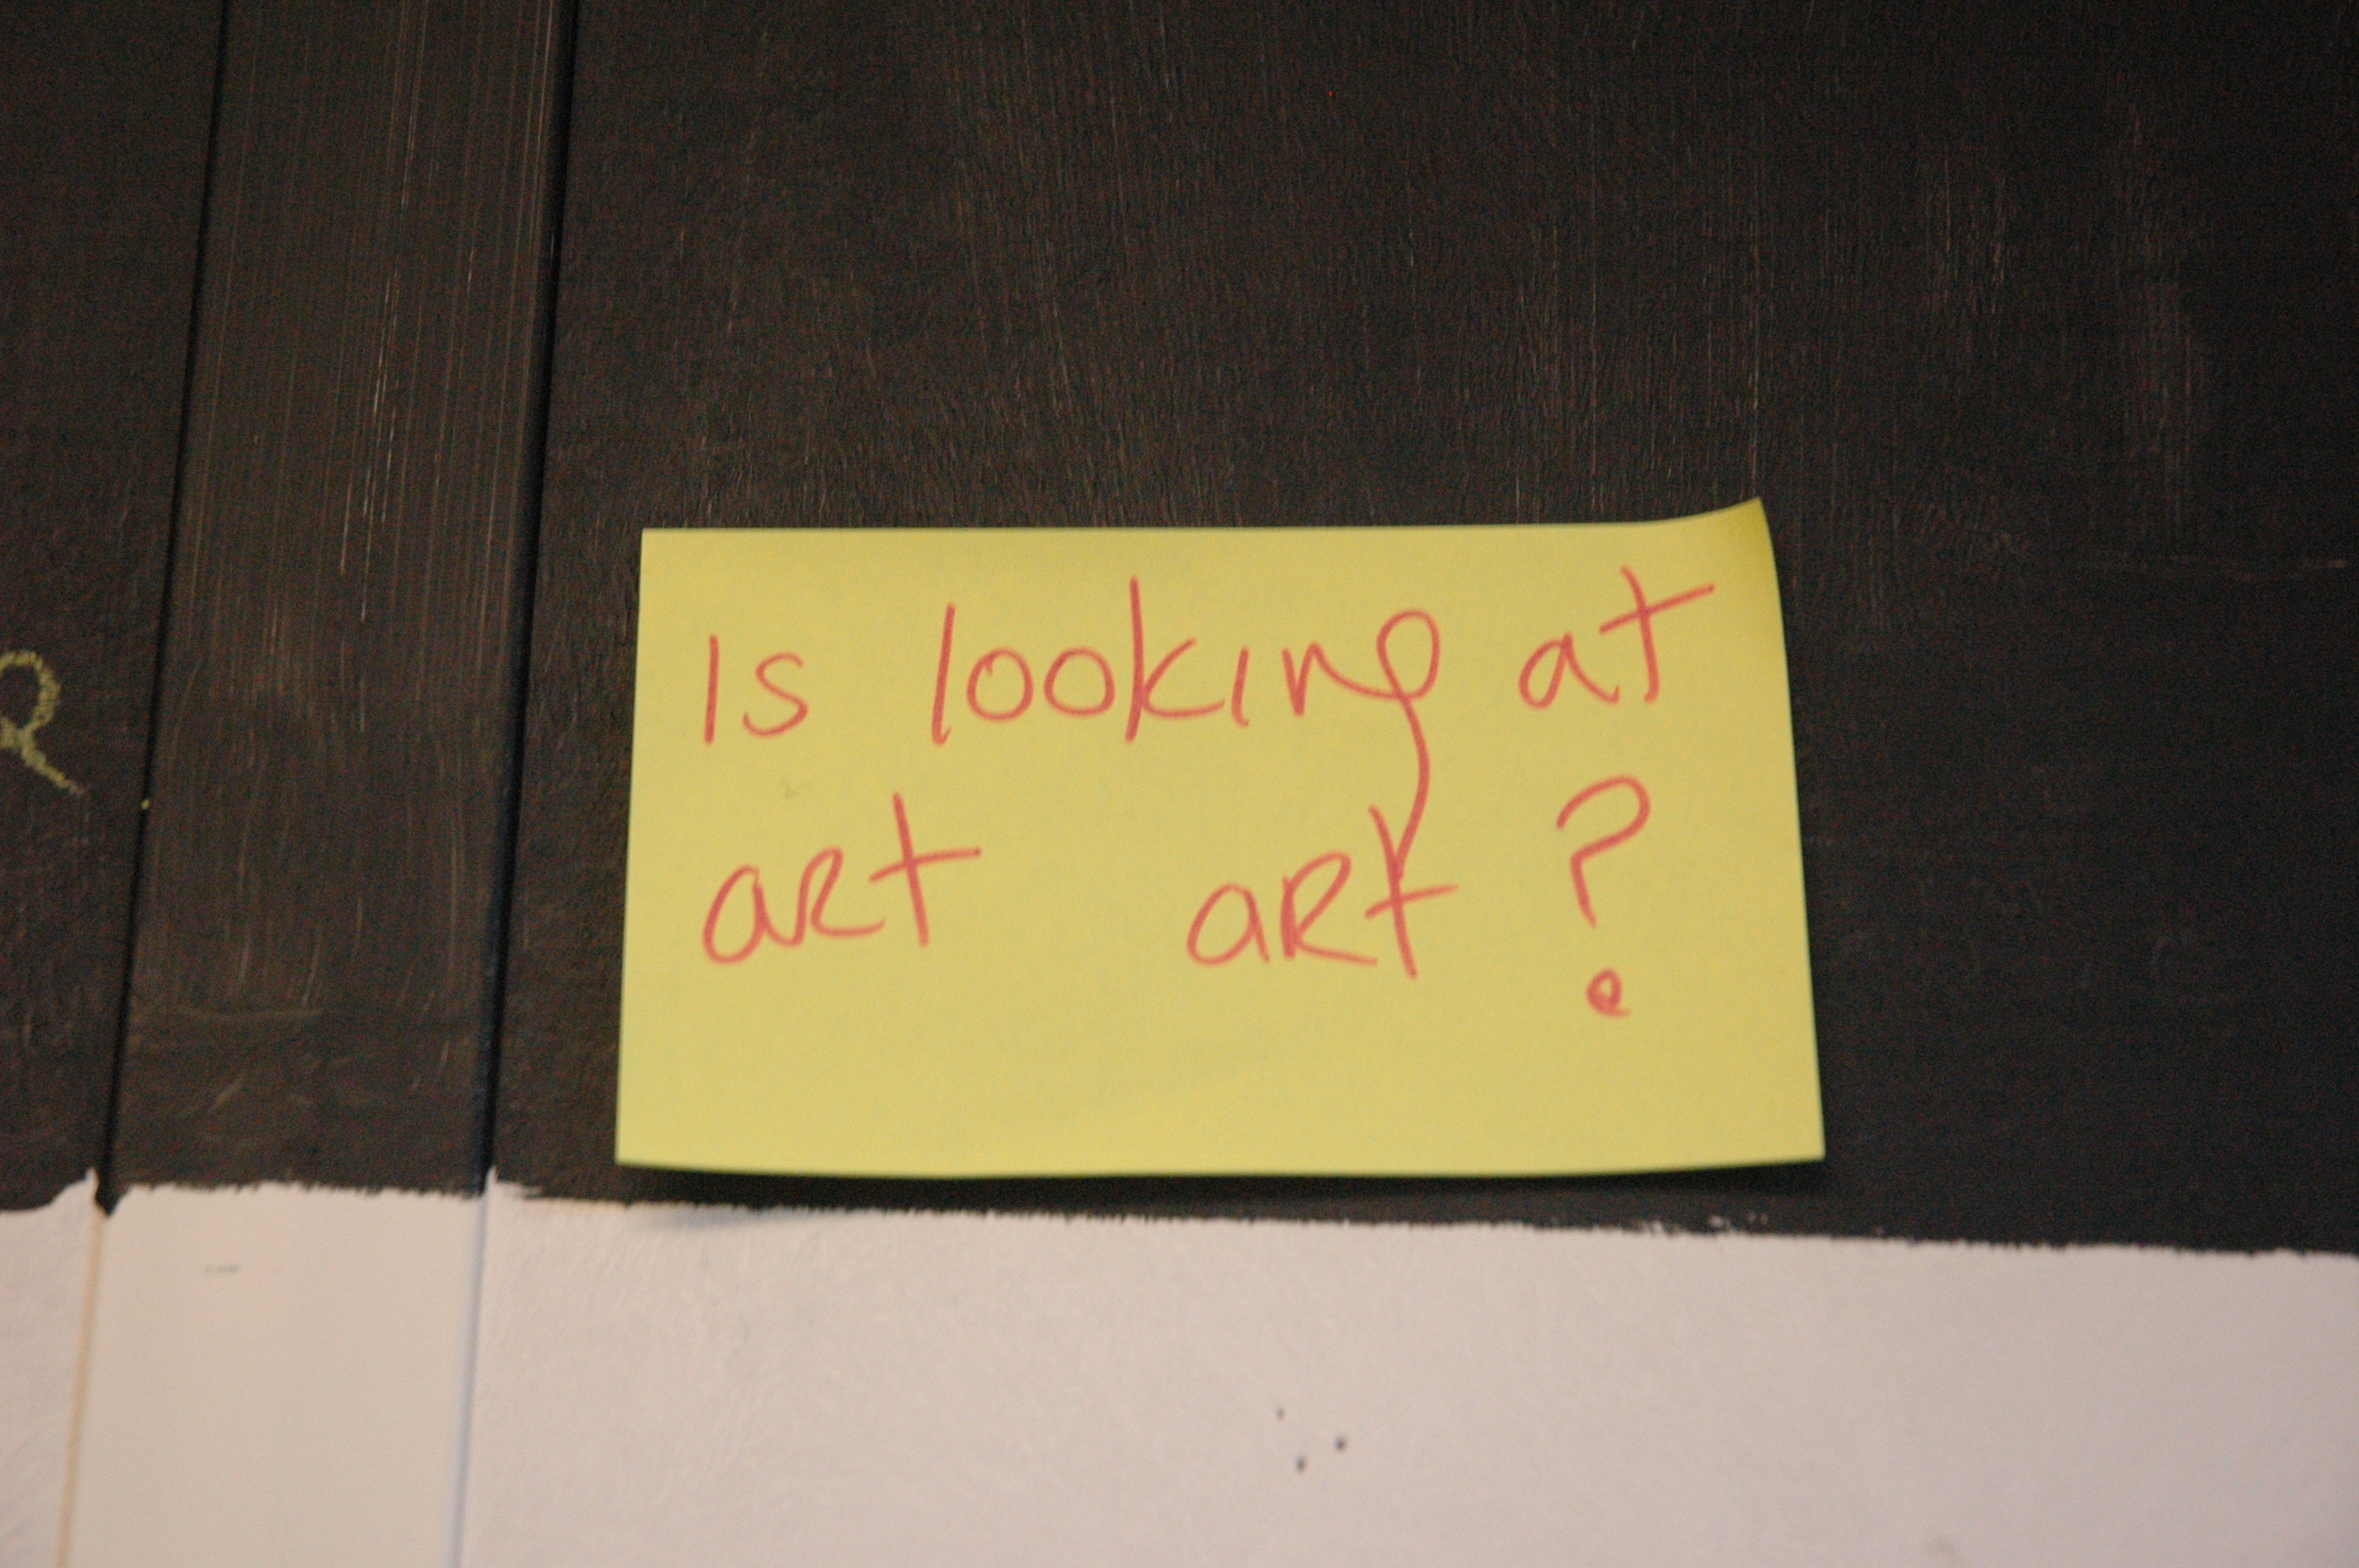  Interesting questions arose out of lively discussions around art and artworks.   